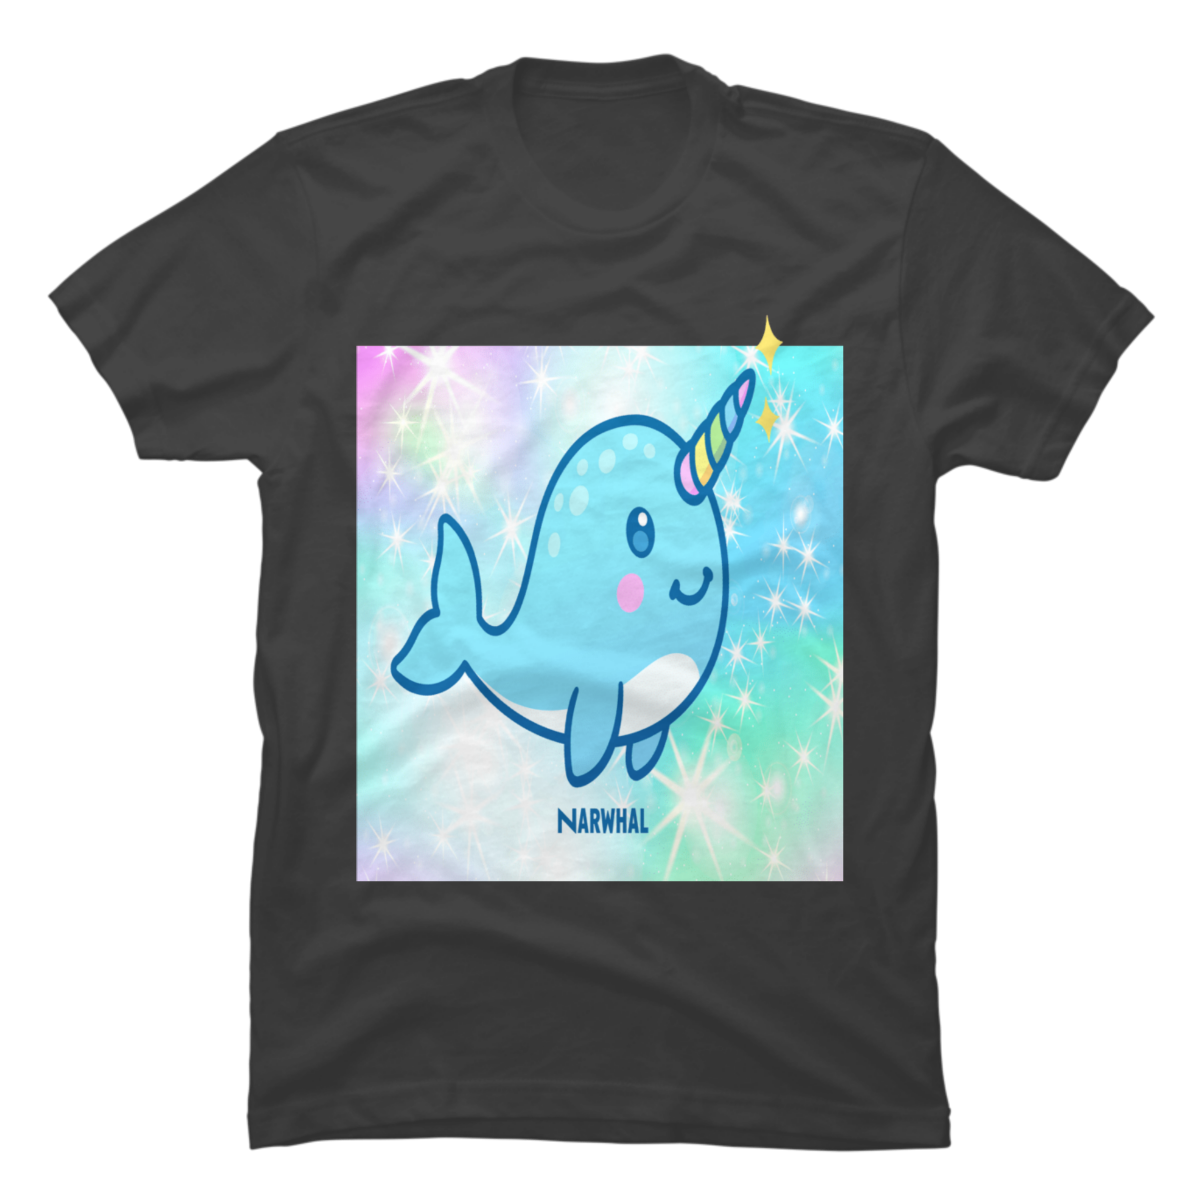 narwhal t shirt